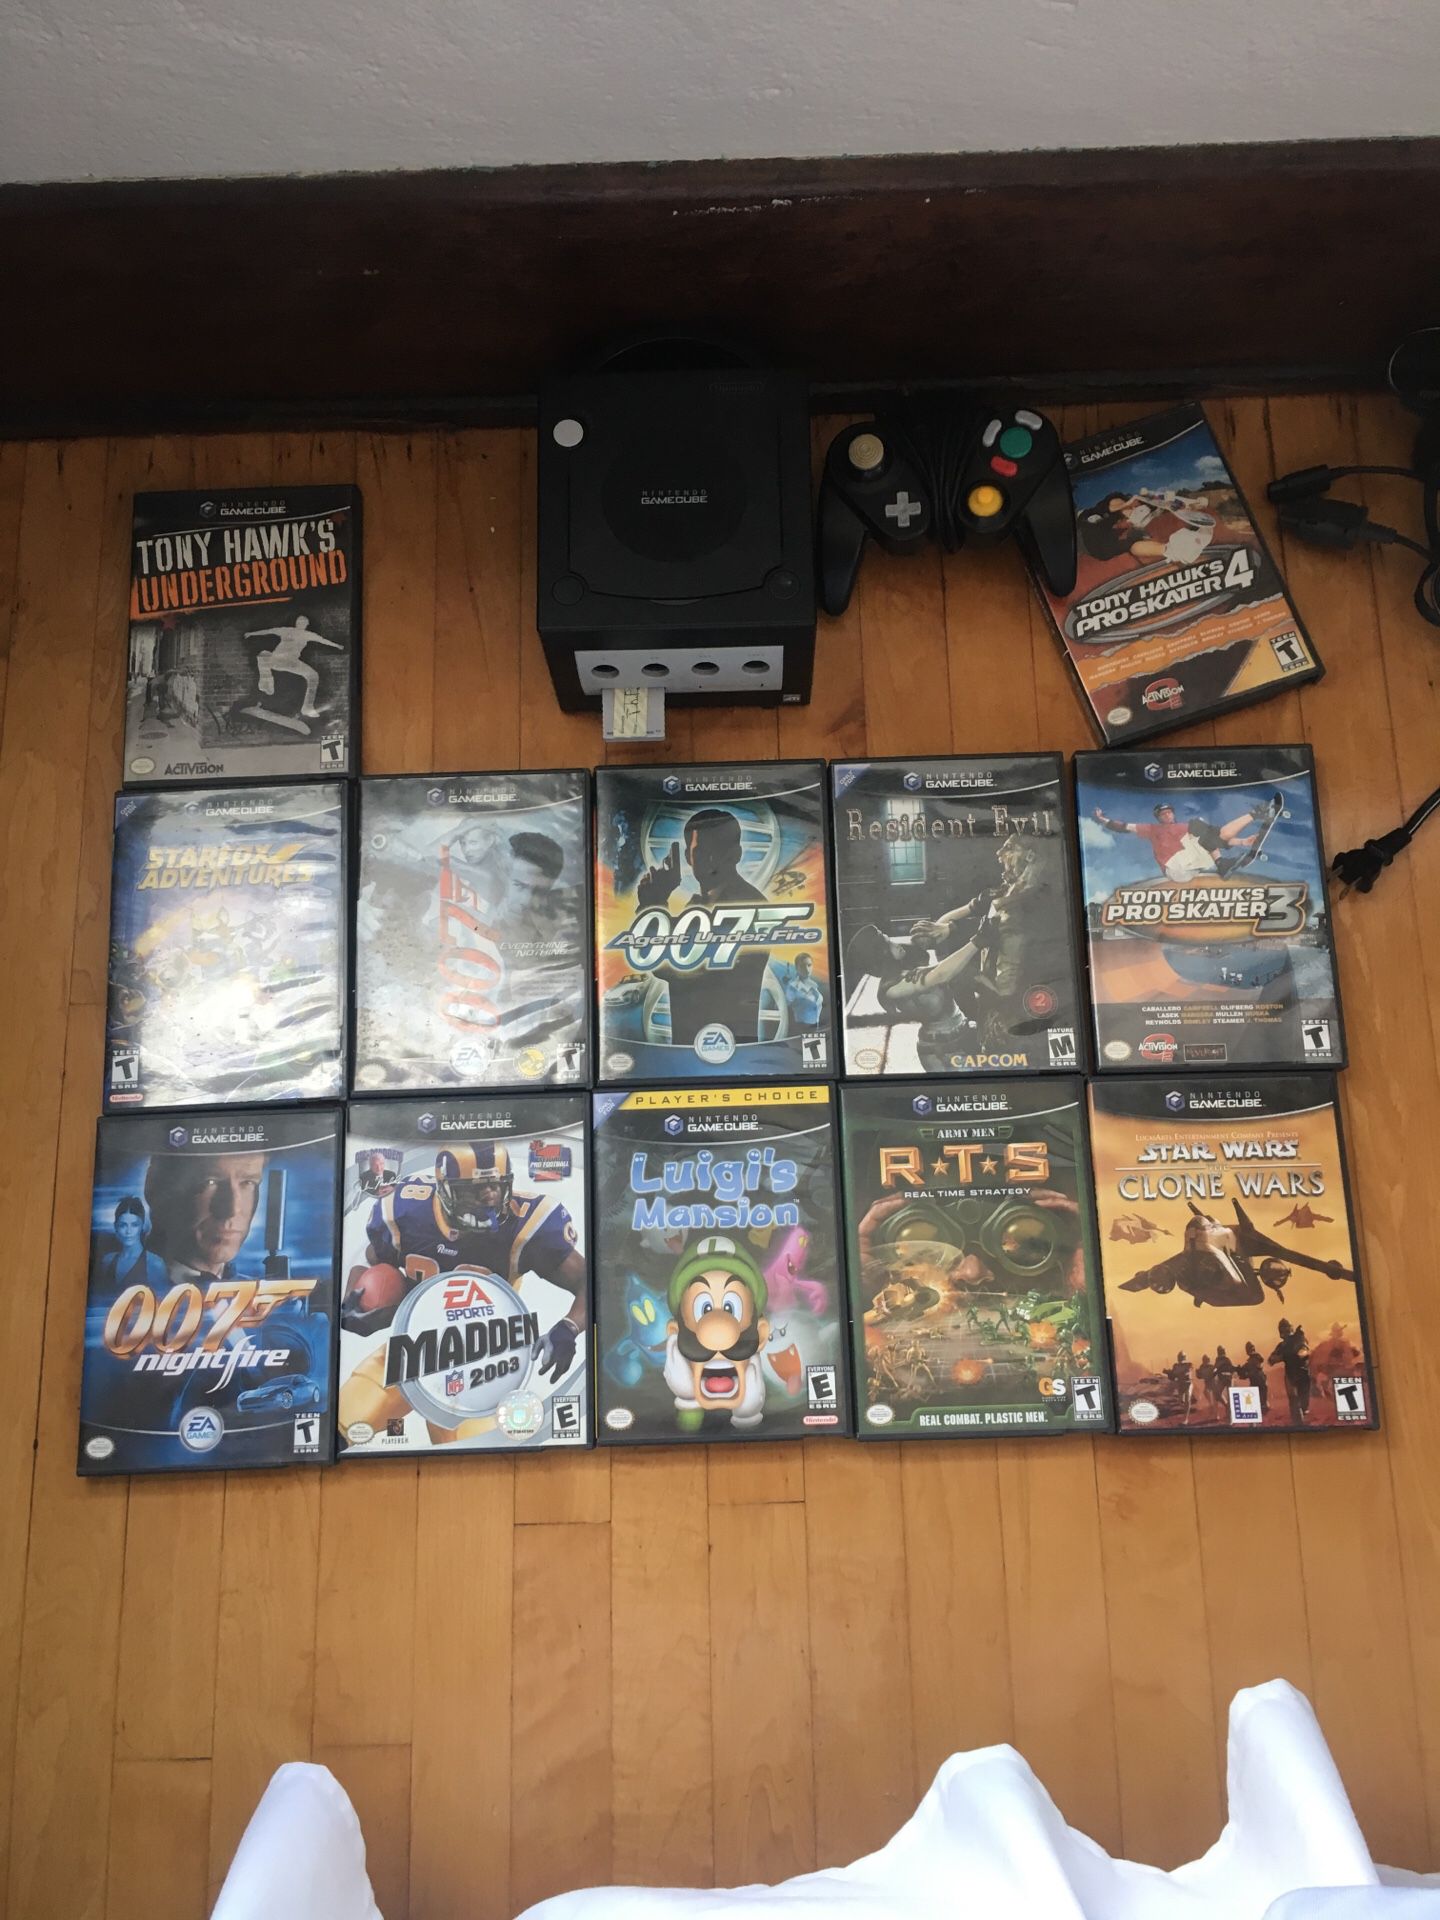 Nintendo GameCube with 12 GameCube games, one controller and memory card